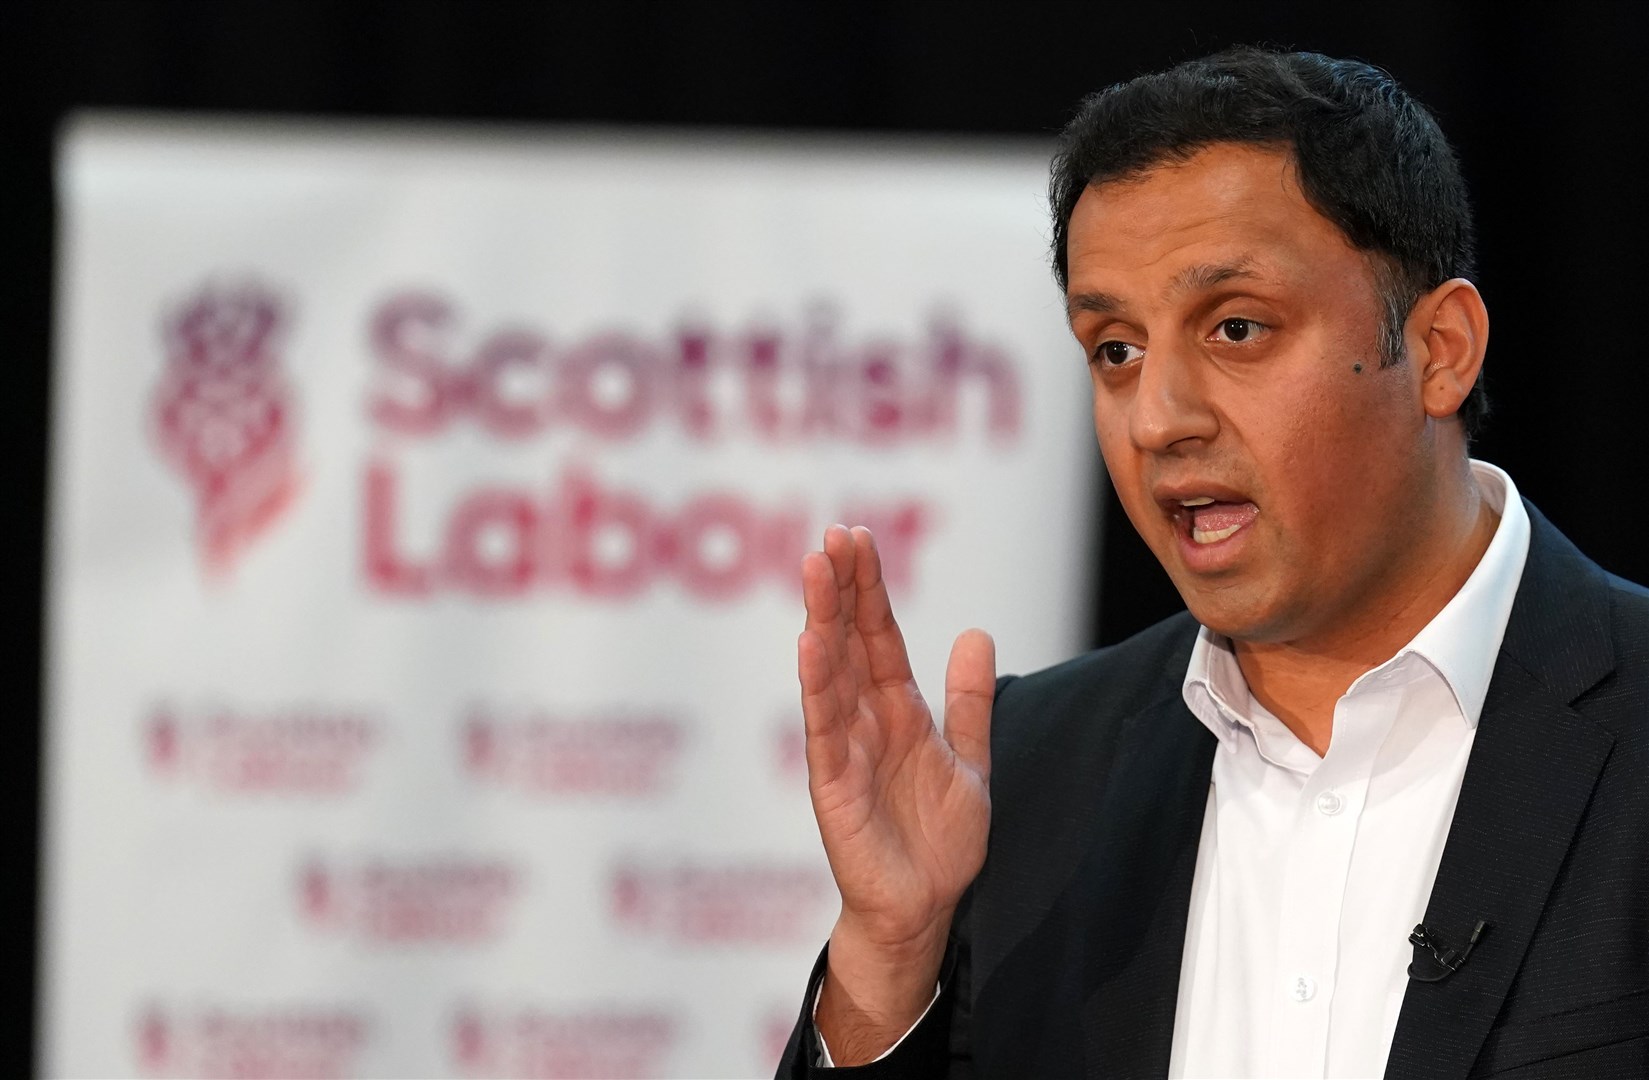 Scottish Labour leader Anas Sarwar said he had ‘struggled to contain his anger’ towards the UK’s ‘zombie government’ (Andrew Milligan/PA)